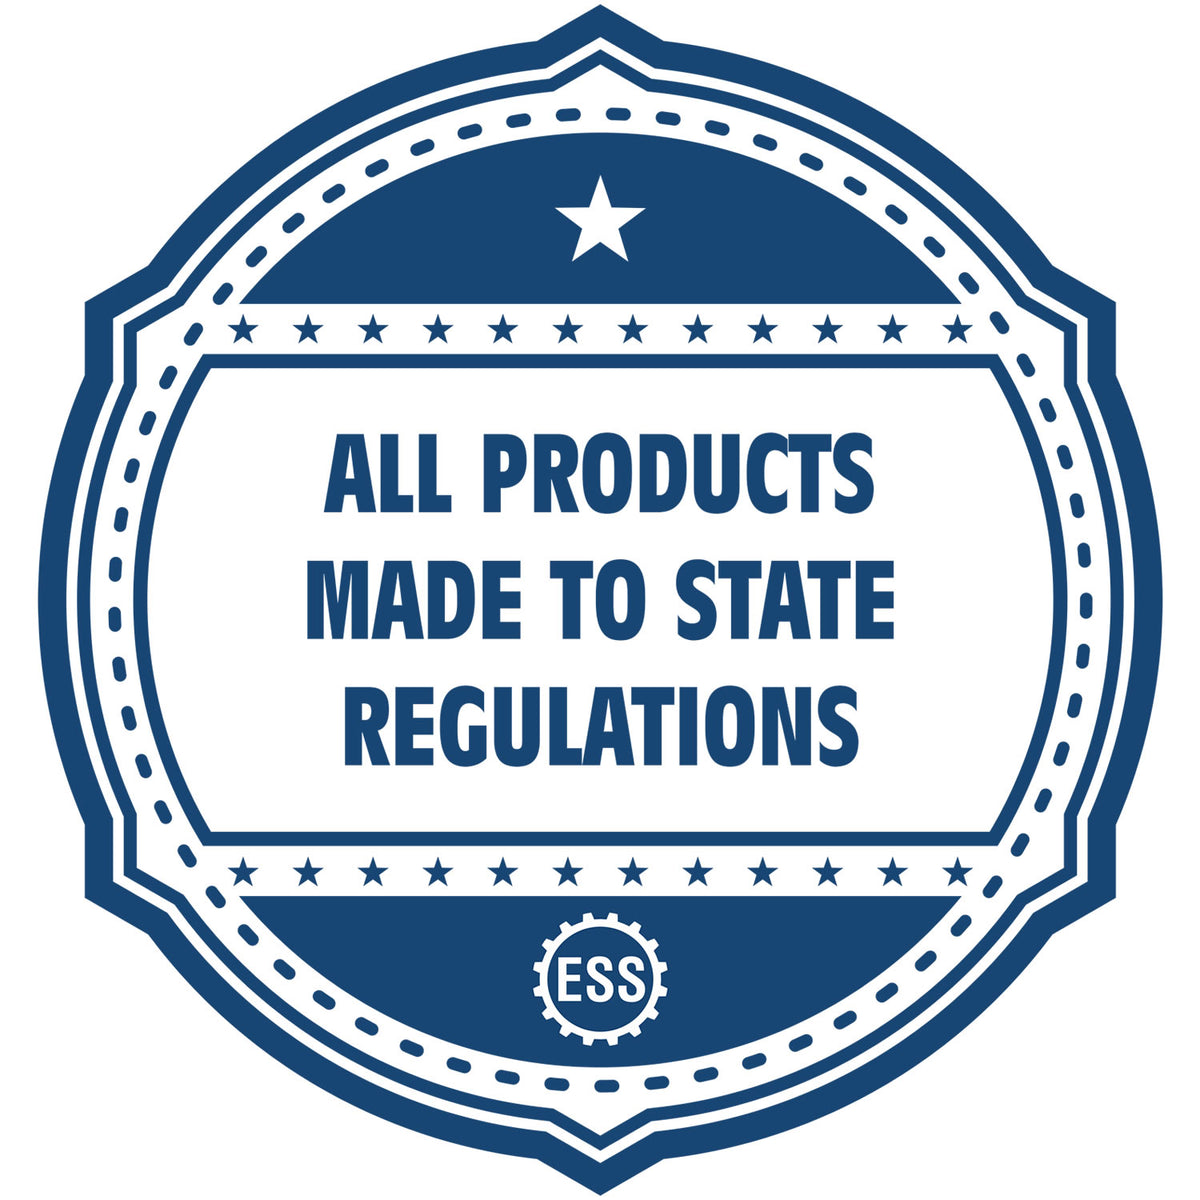 An icon or badge element for the Digital Arizona Landscape Architect Stamp showing that this product is made in compliance with state regulations.